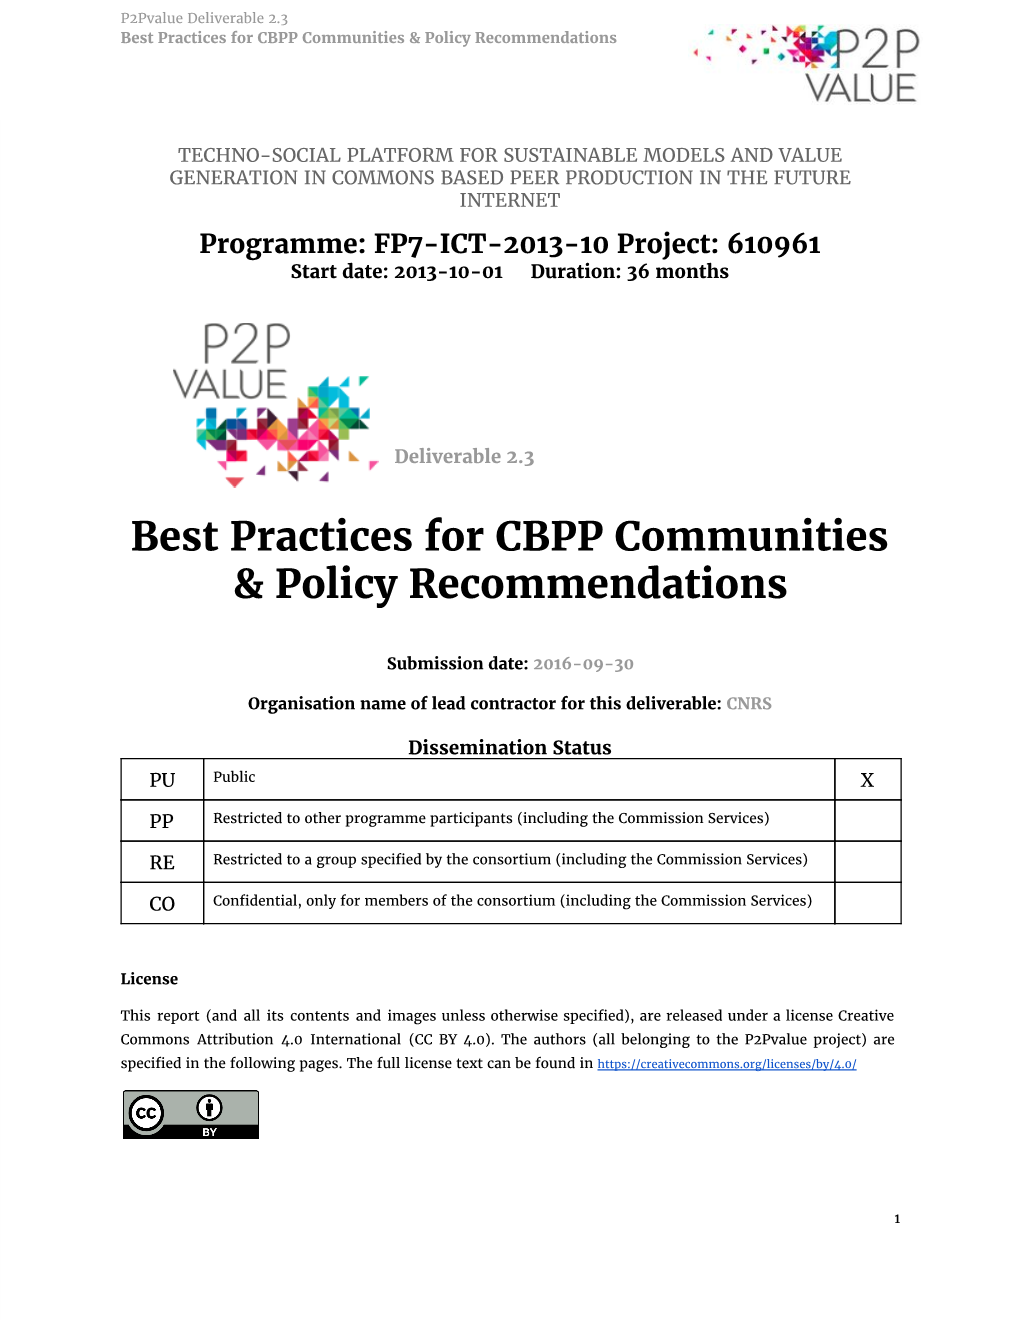 Best Practices for CBPP Communities & Policy Recommendations